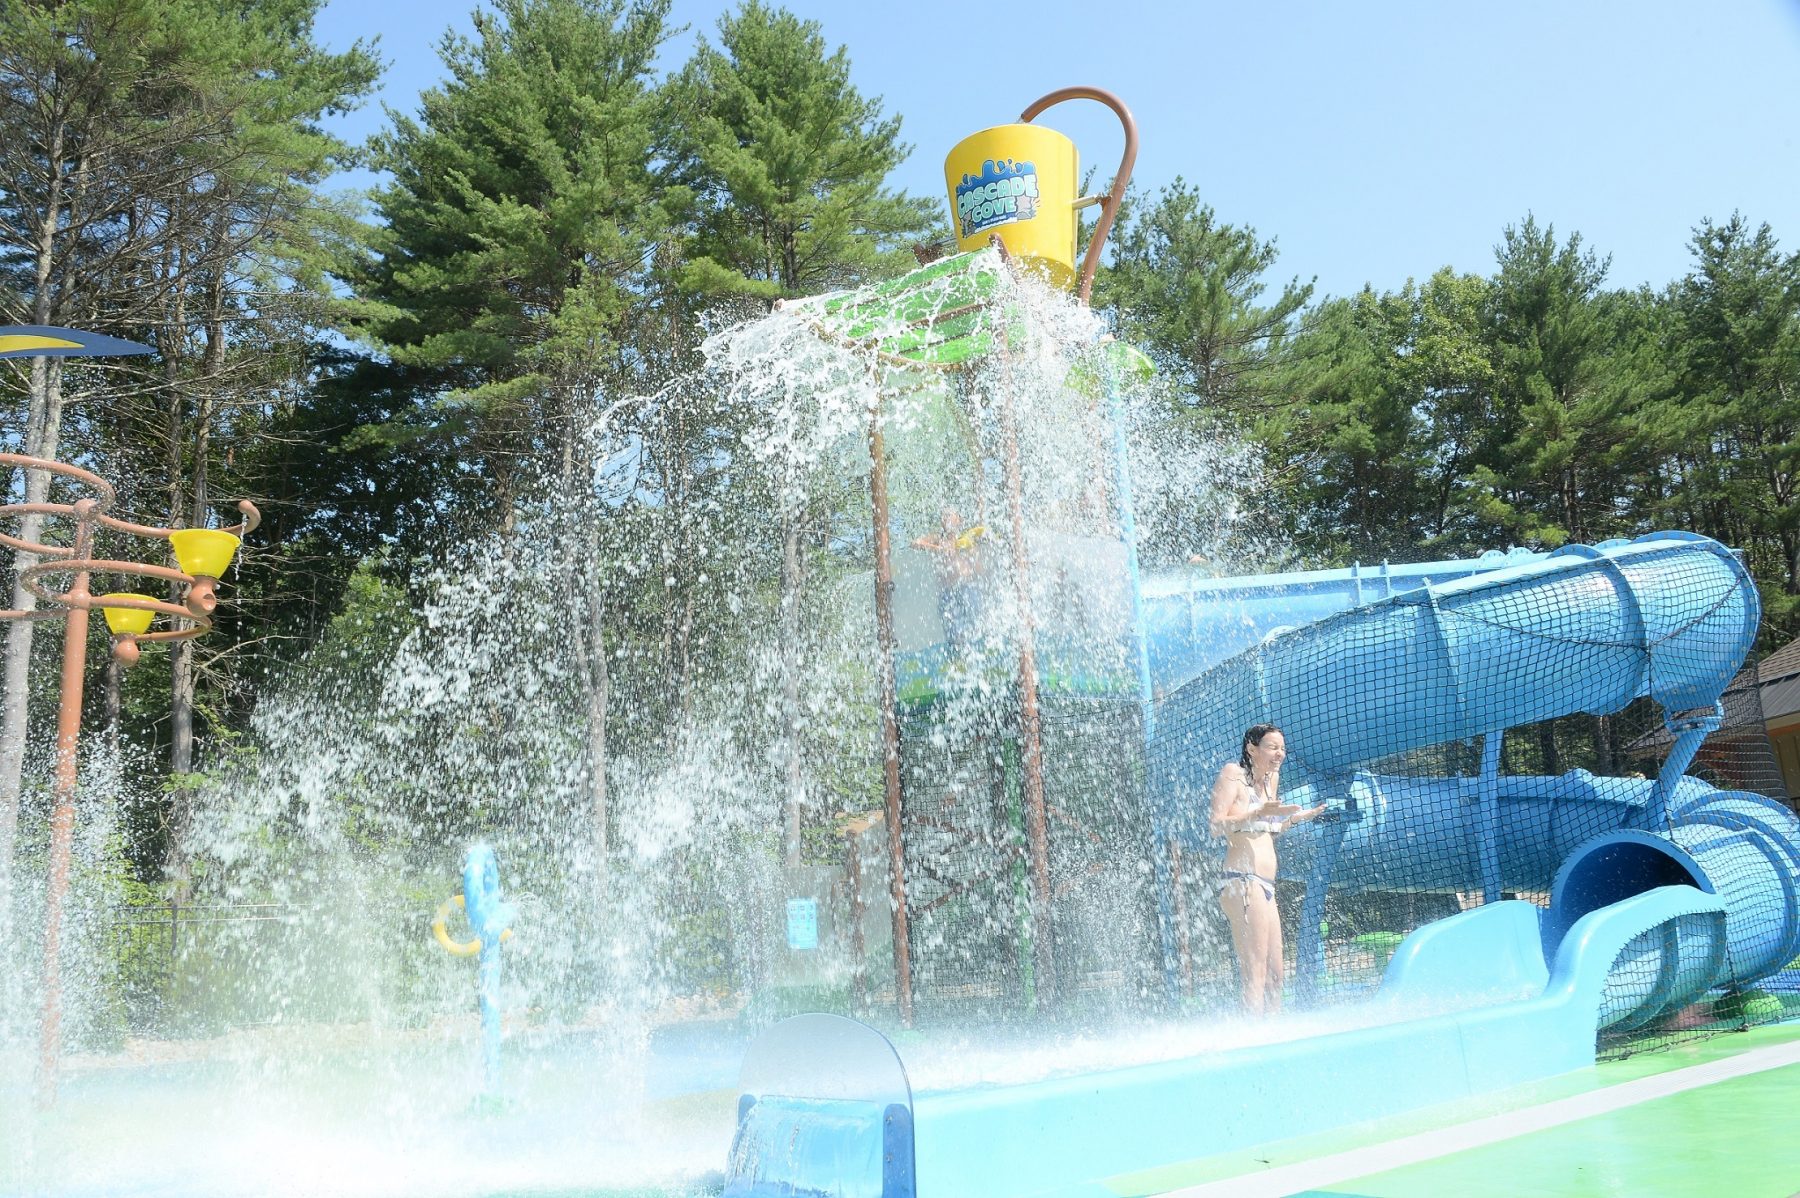 In the foreground of this photo the bottom of the slide is shown. Behind the slide there is a young woman being sprayed by the various sprayers.  The dump bucket is shown upright at the top of the photo in the center. To the right side of the photo the enclosed slide is shown.